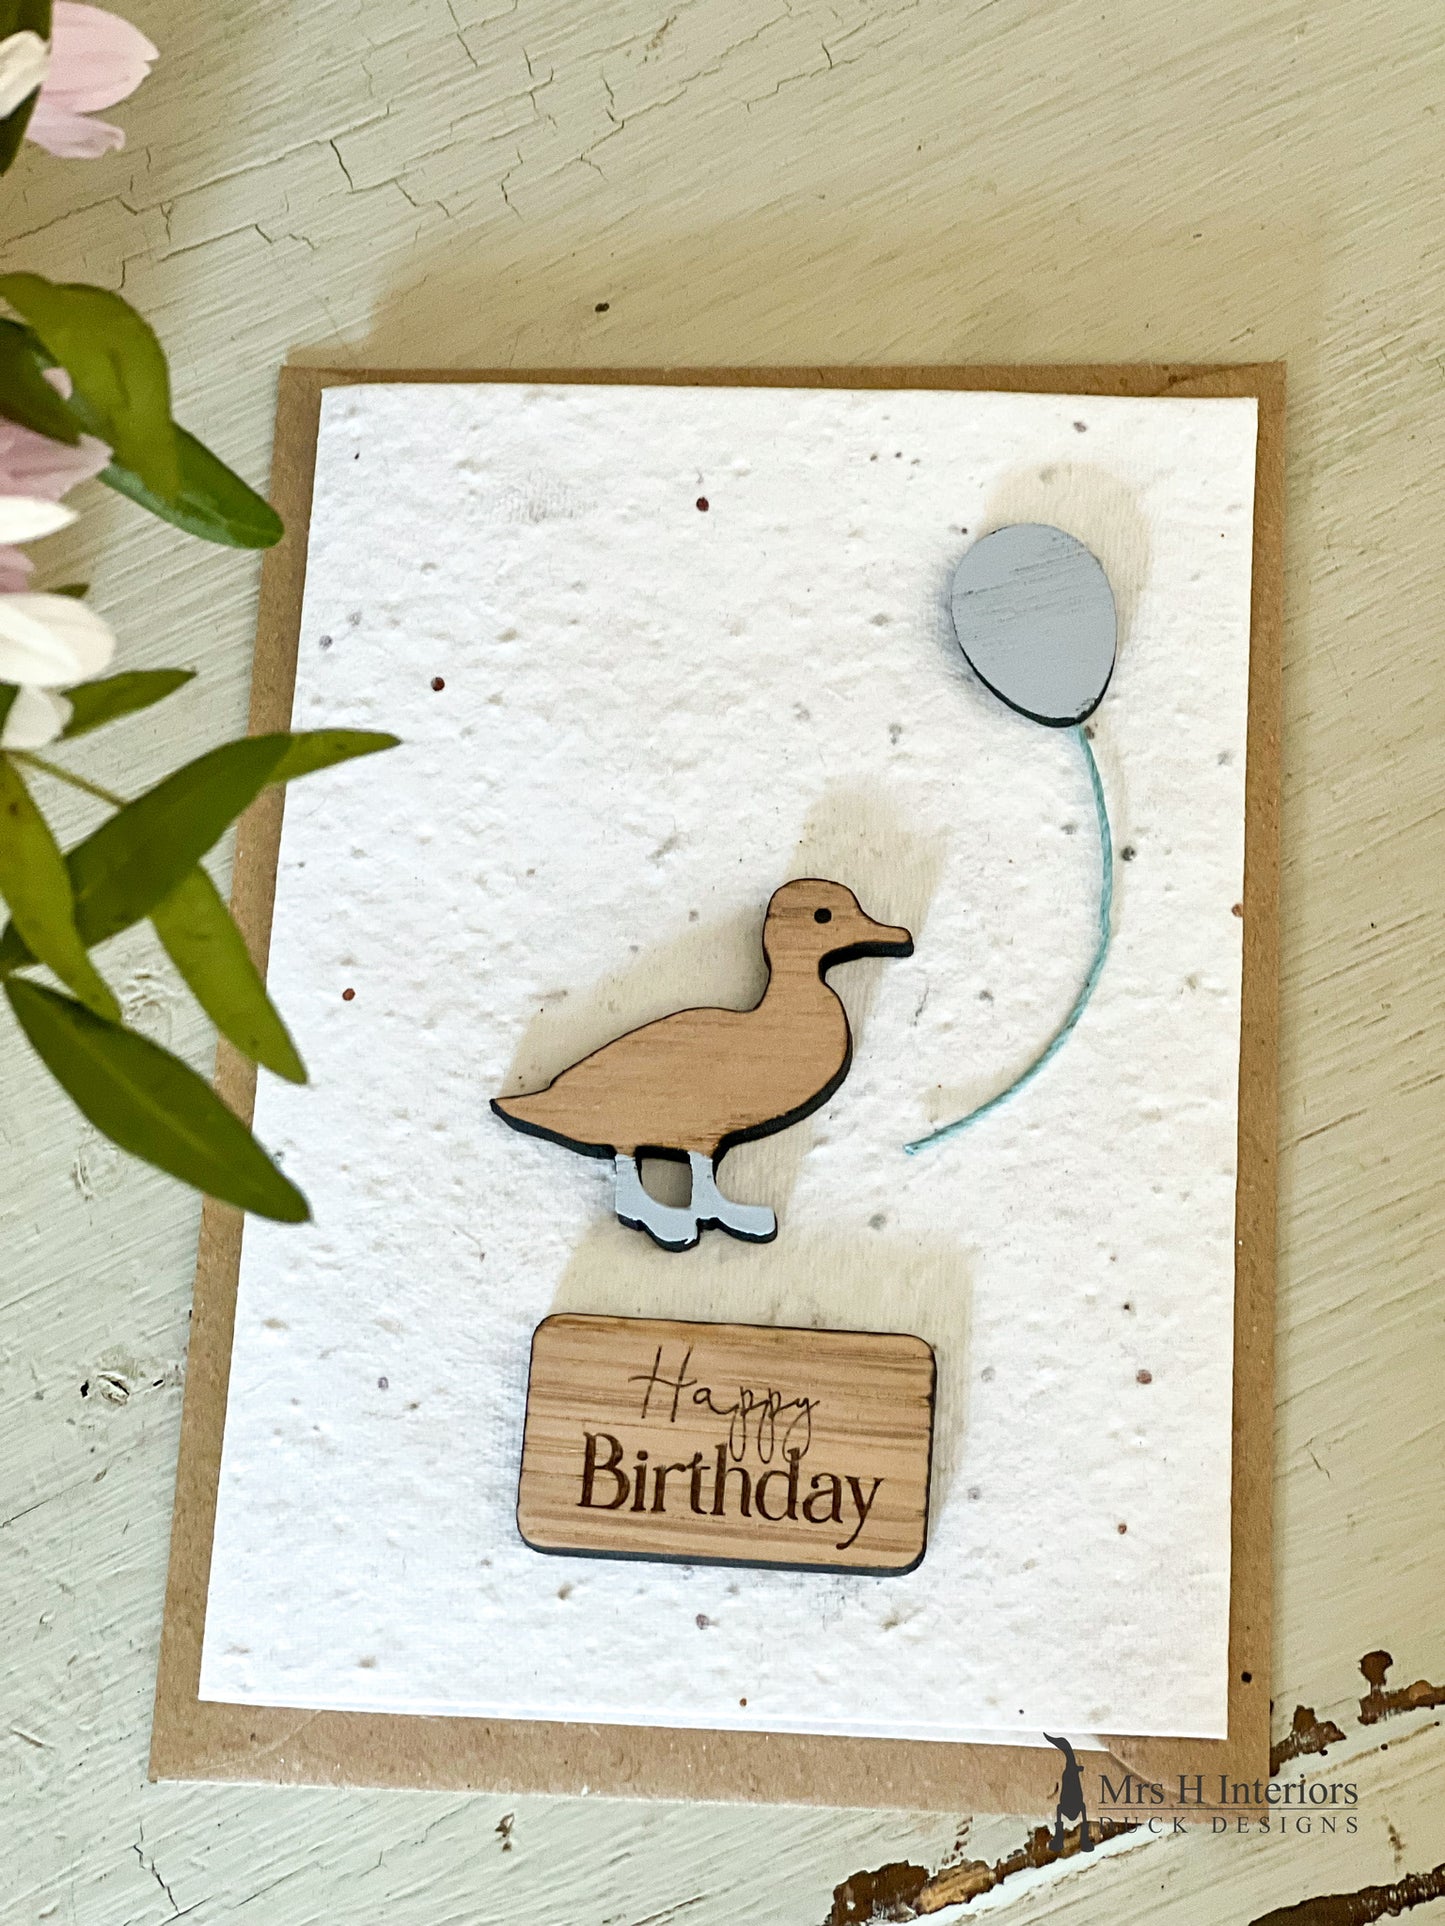 Happy Birthday - Duckling & Balloon - Greetings Card - Decorated Wooden Duck in Boots by Mrs H the Duck Lady